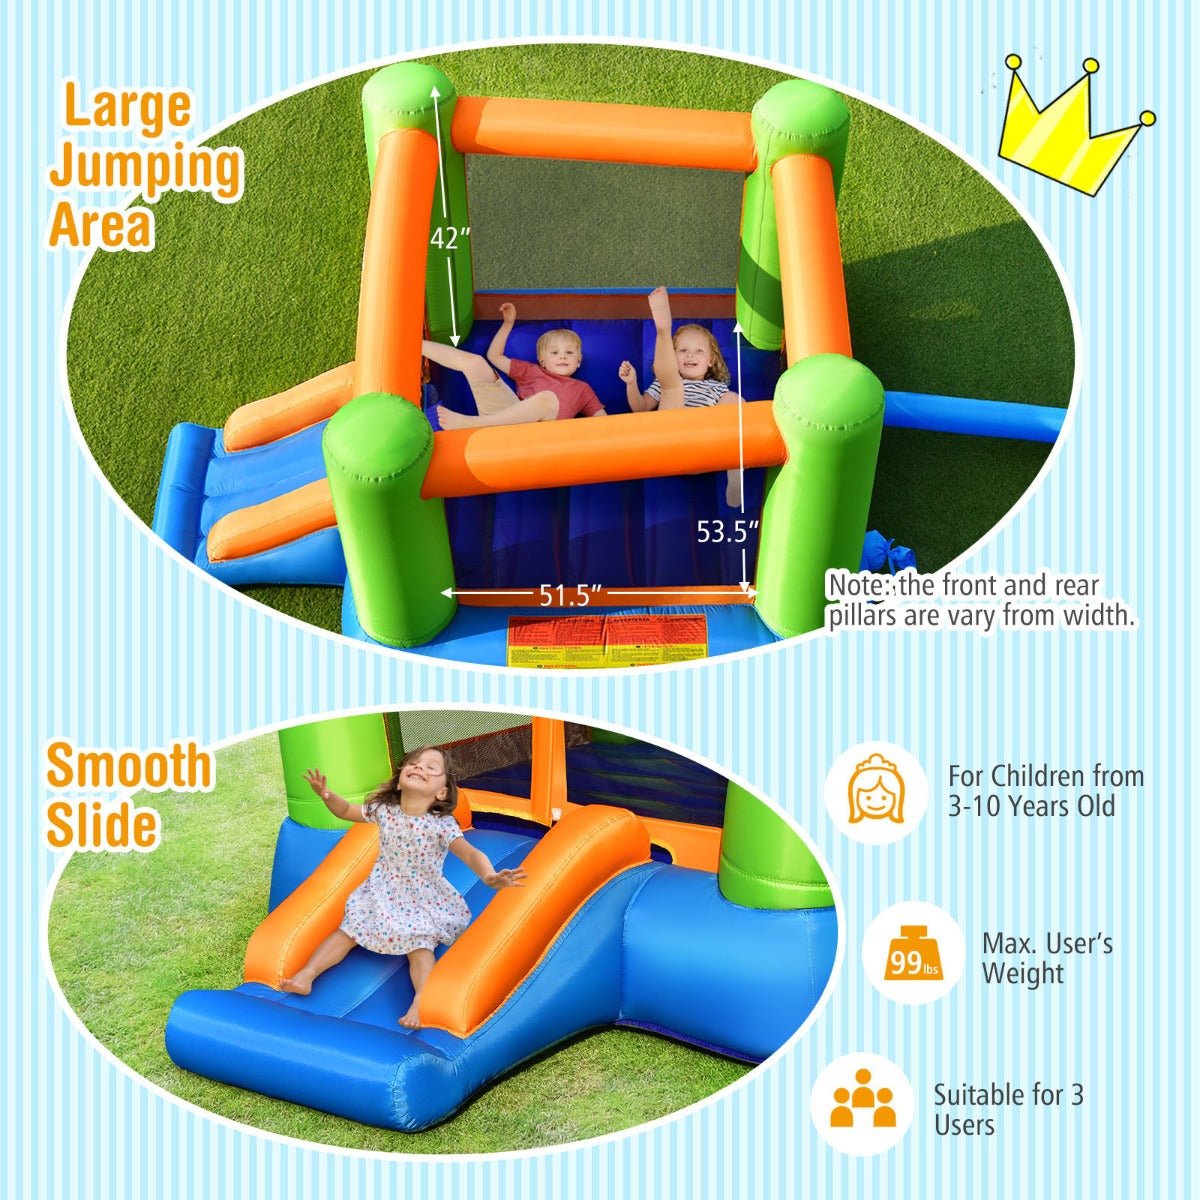 Experience Joy: Inflatable Bounce House with Jumping Area & Slide